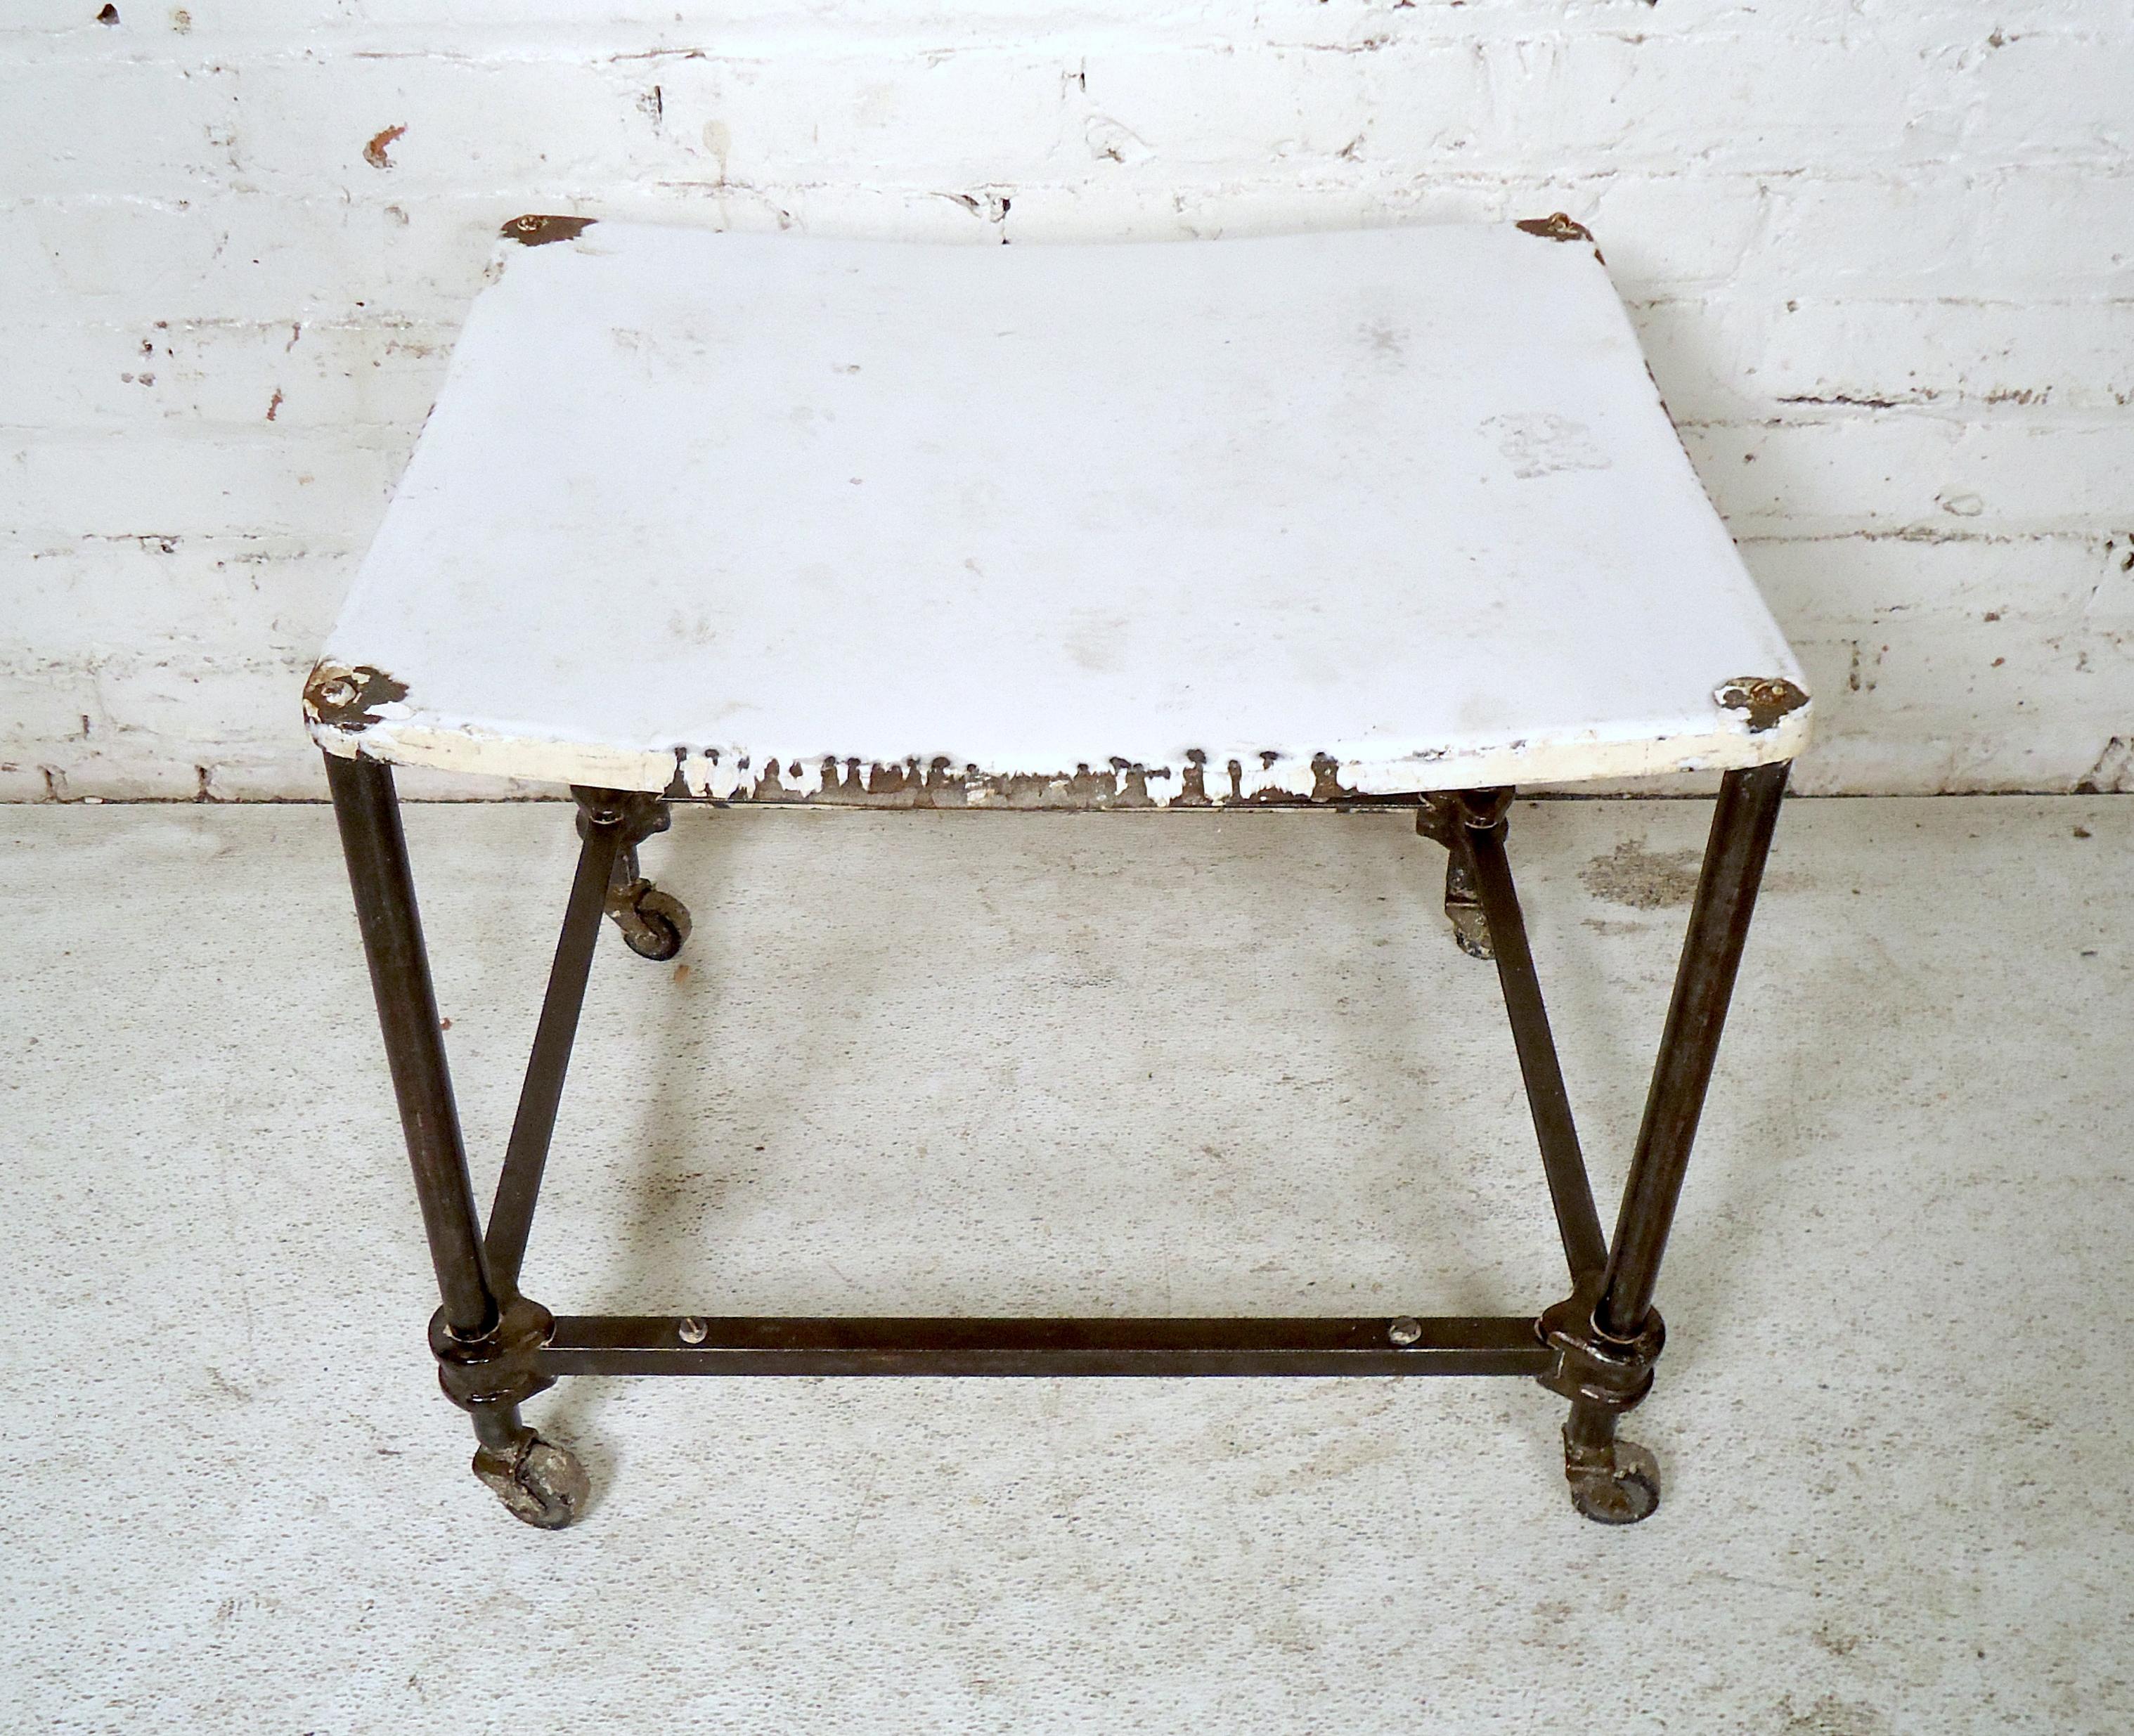 The sleek vintage industrial metal design has rounded edges on the top and wheels on its feet for added convenience. Please confirm item location (NY or NJ).